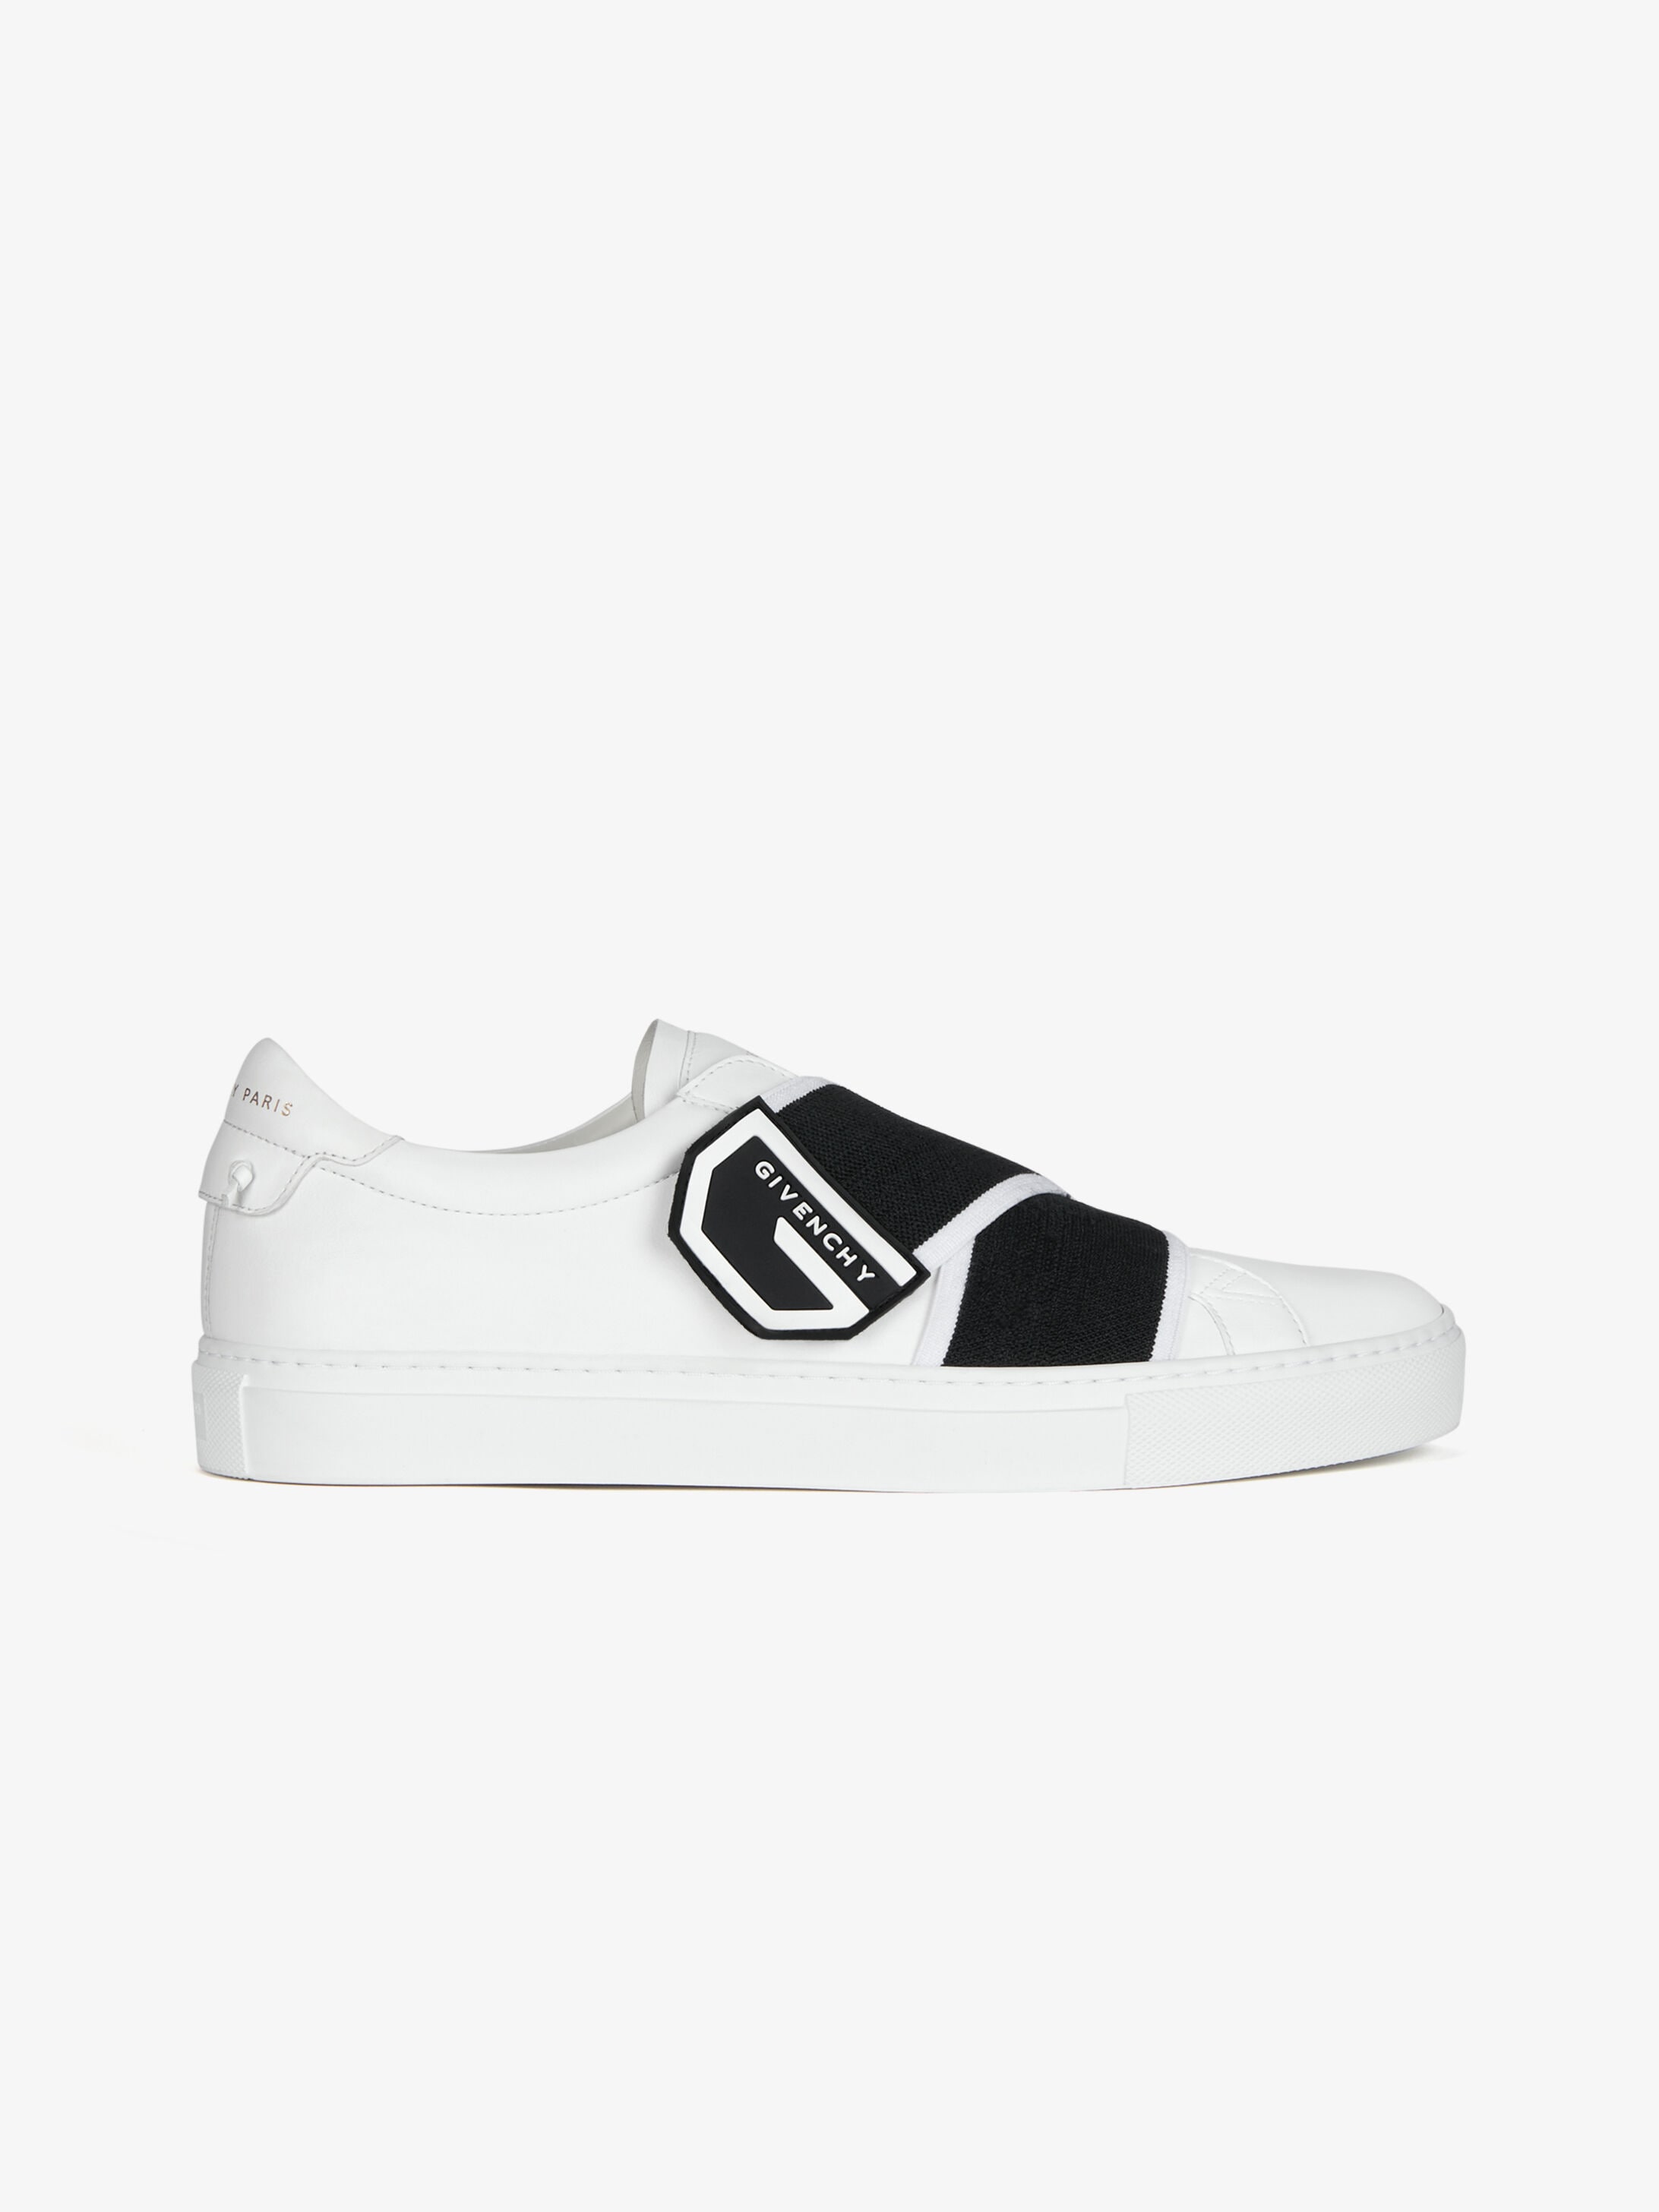 GIVENCHY crossed webbing sneakers in 